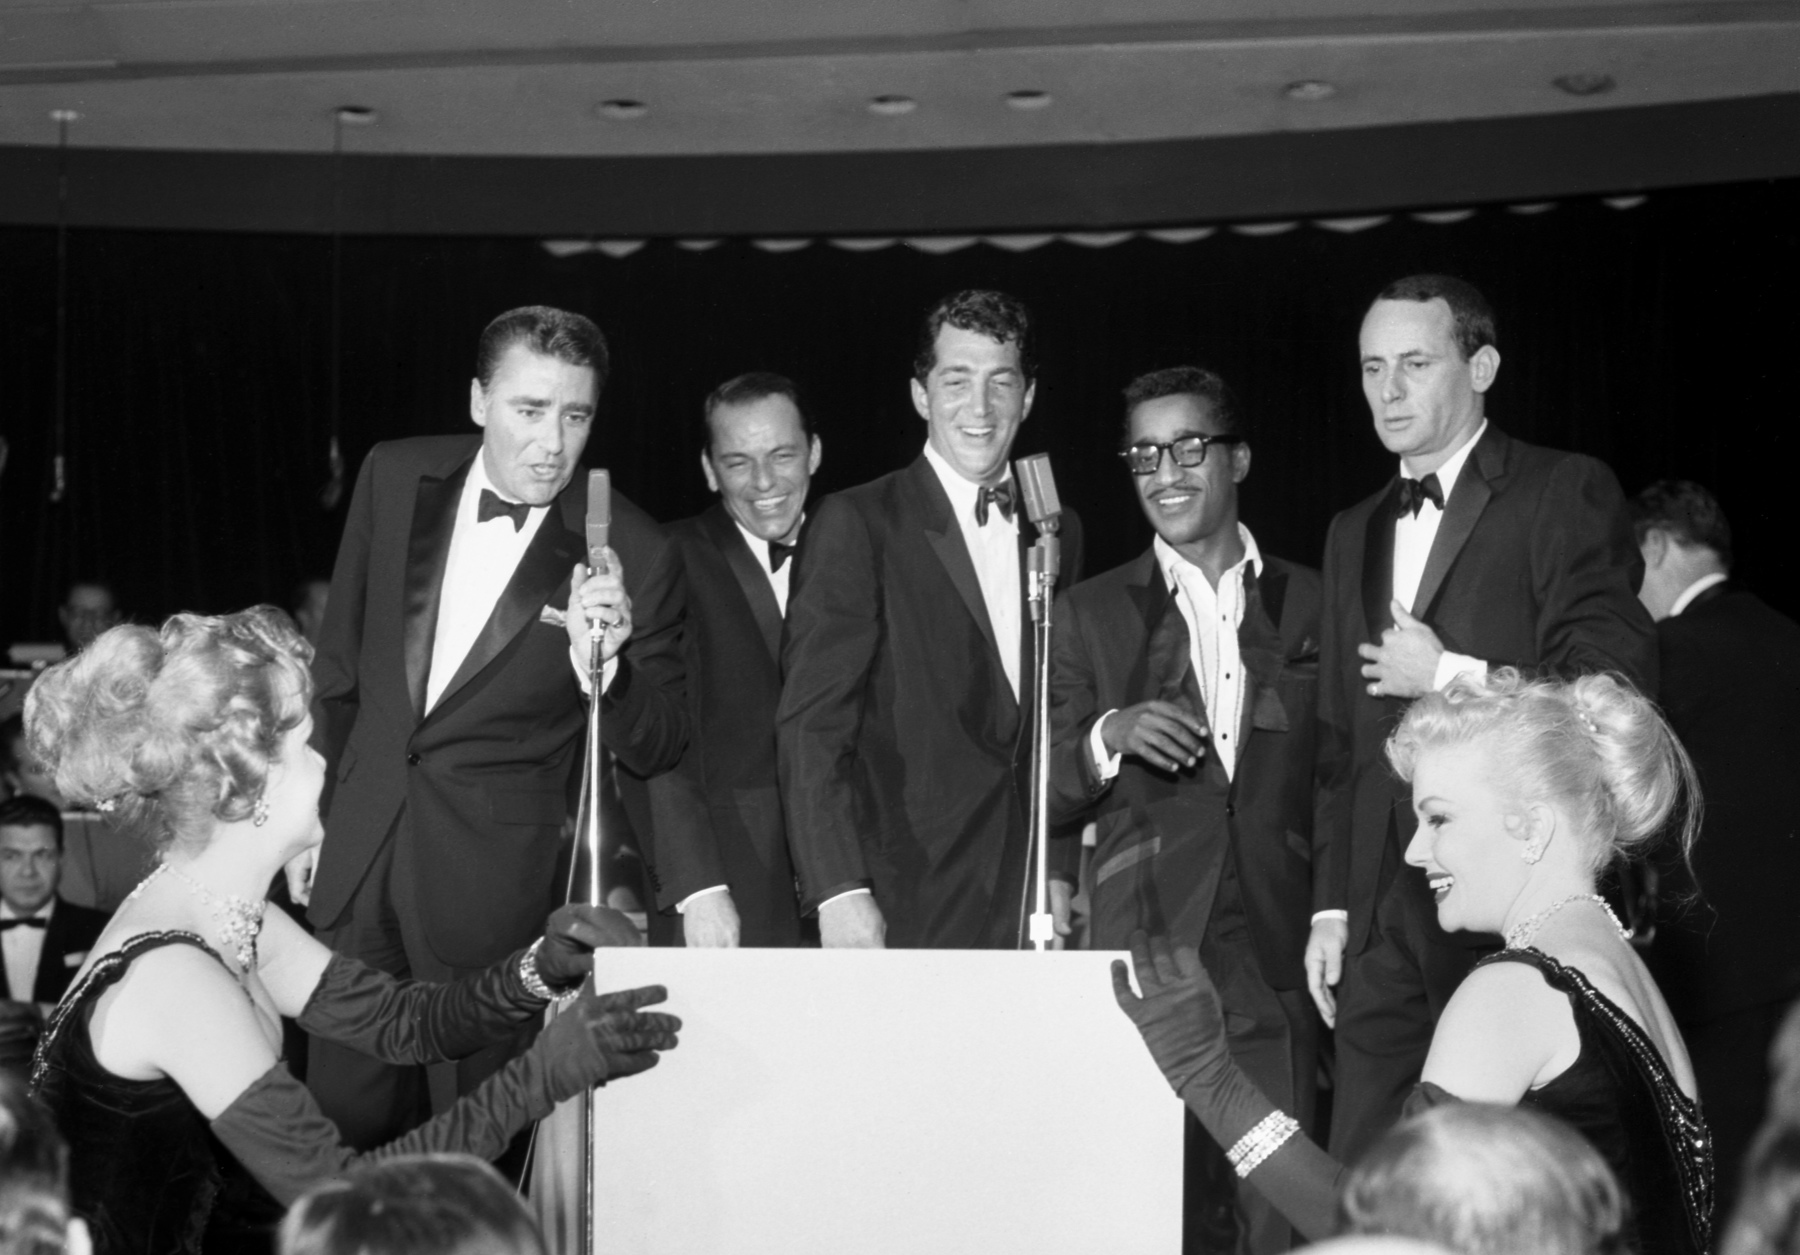 The Rat Pack performs in Las Vegas at the Sands Hotel on January 20, 1960. From Left: Peter Lawford, Frank Sinatra, Dean Martin, Sammy Davis Jr. and Joey Bishop.  CREDIT: Las Vegas News Bureau. For editorial use by news organizations only.